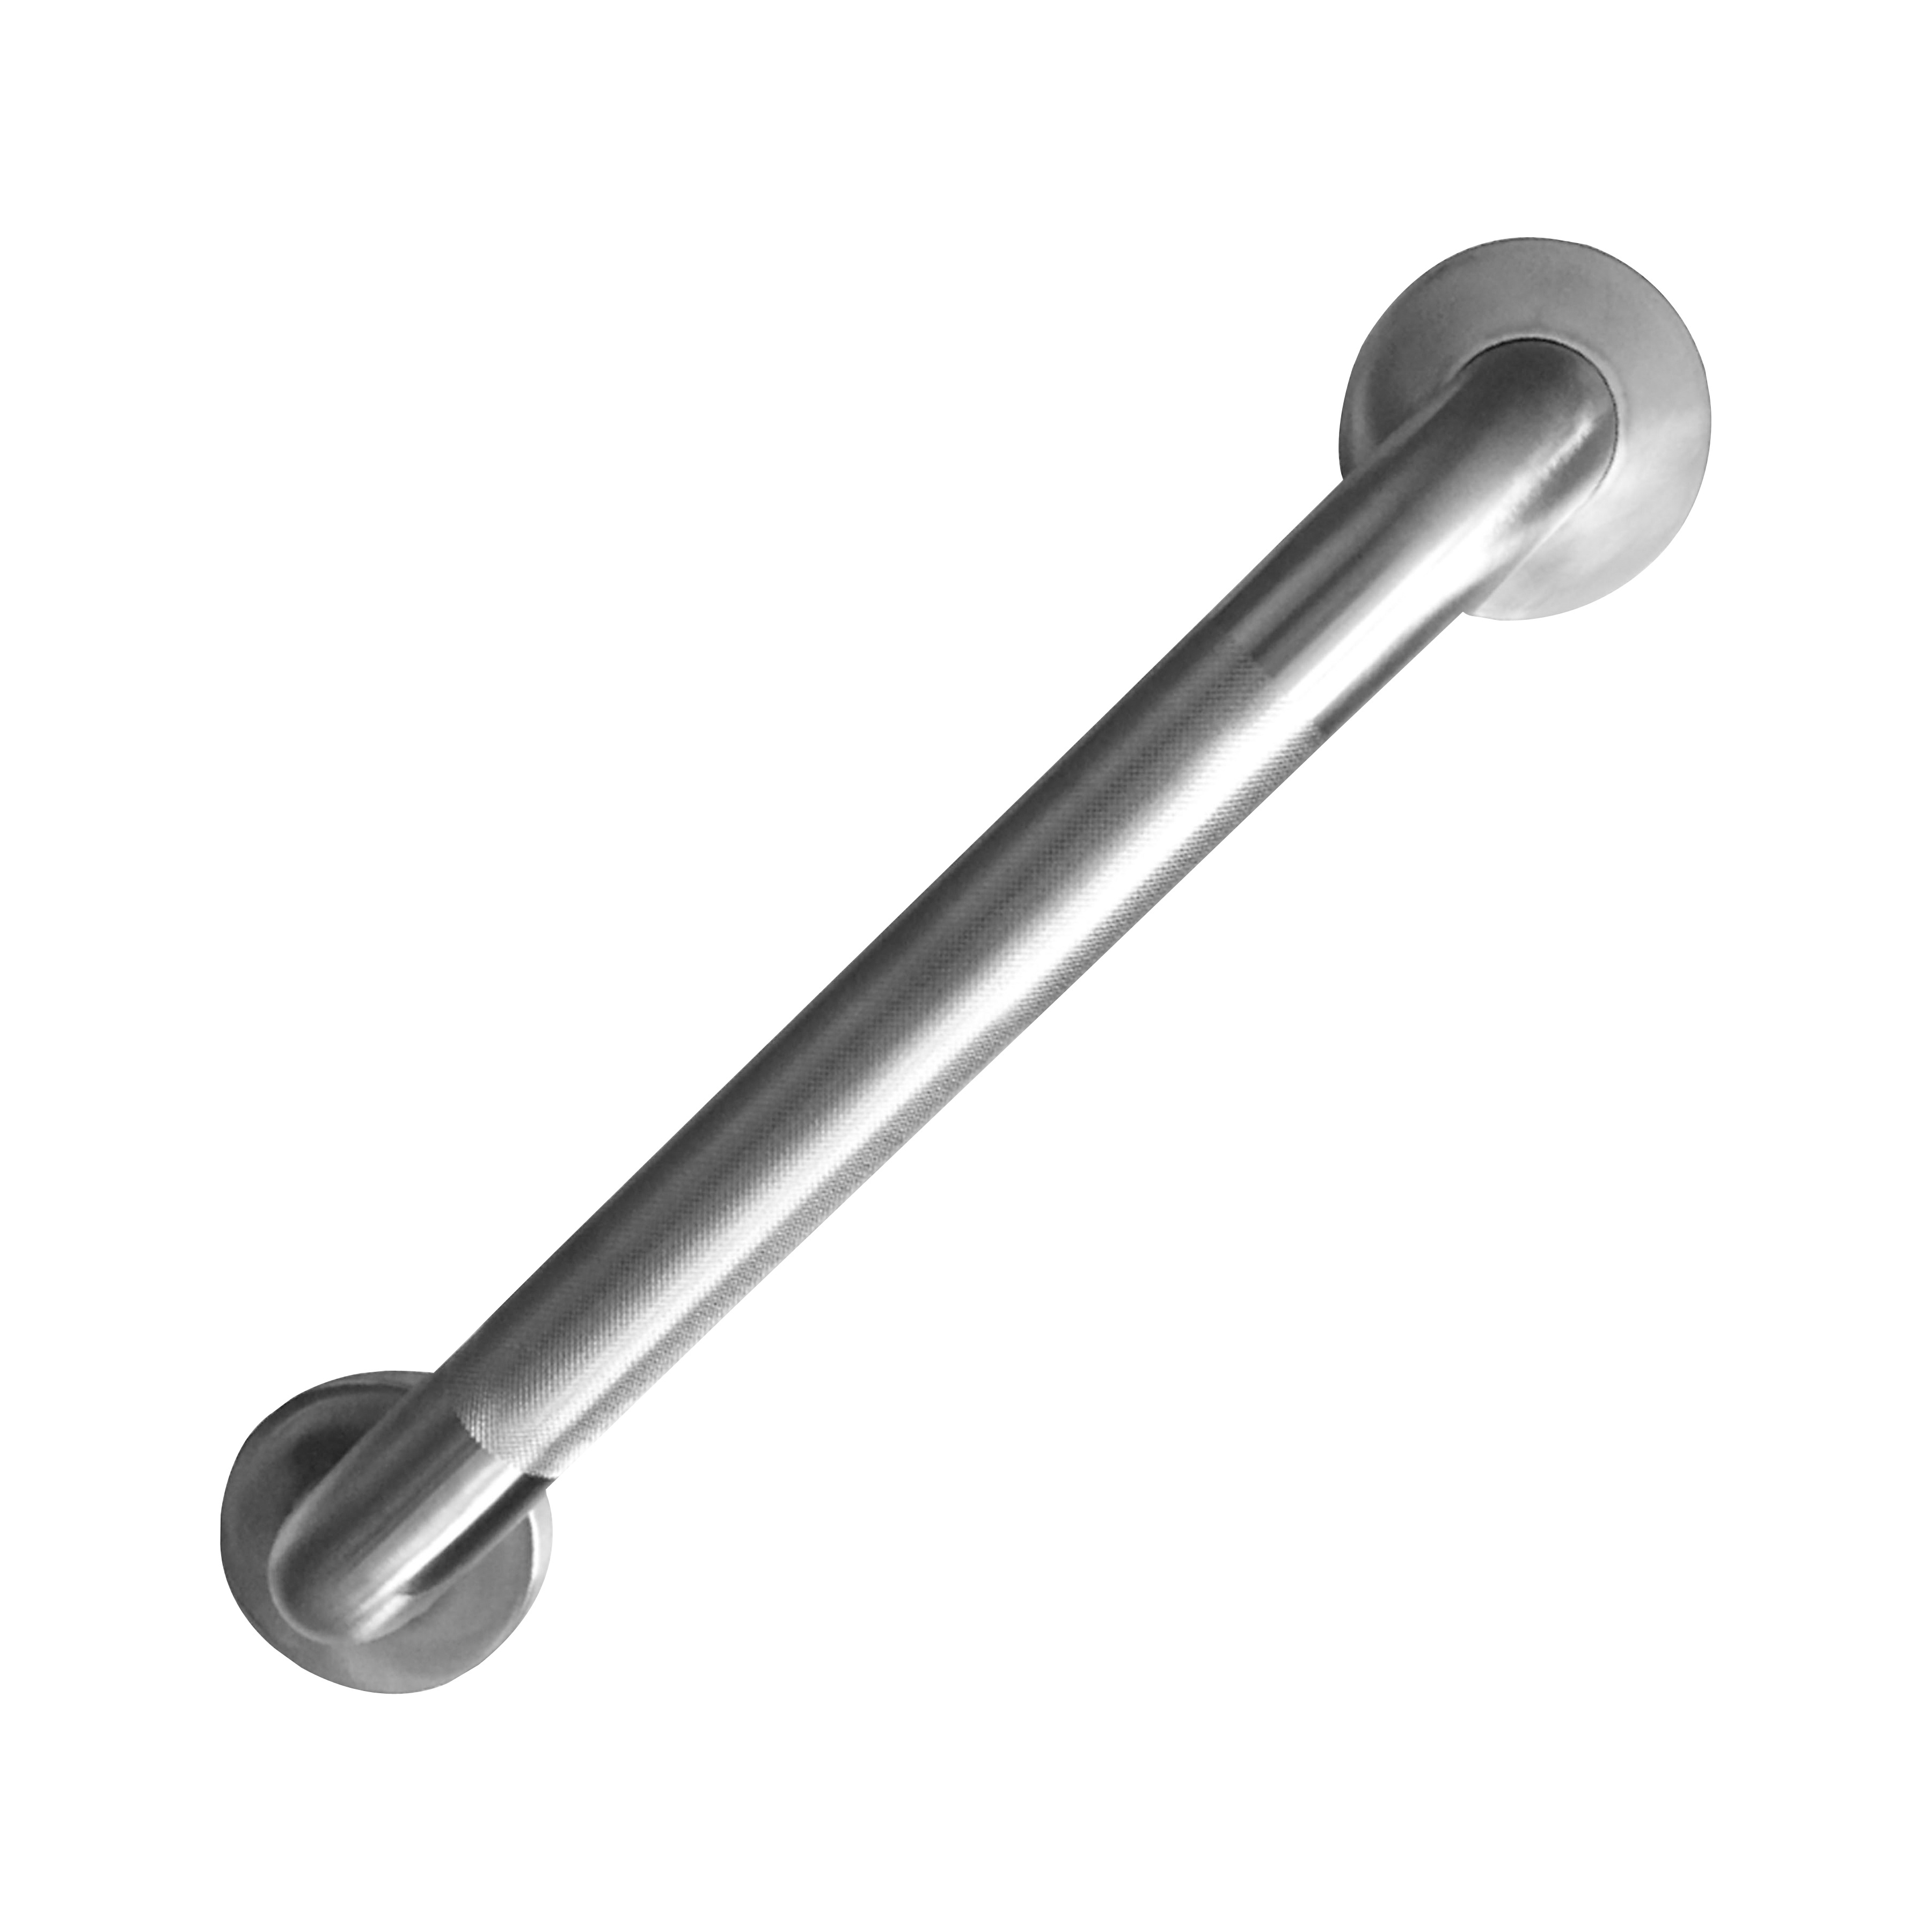 Boston Harbor SG01-01&0418 Grab Bar, 18 in L Bar, Stainless Steel, Wall Mounted Mounting